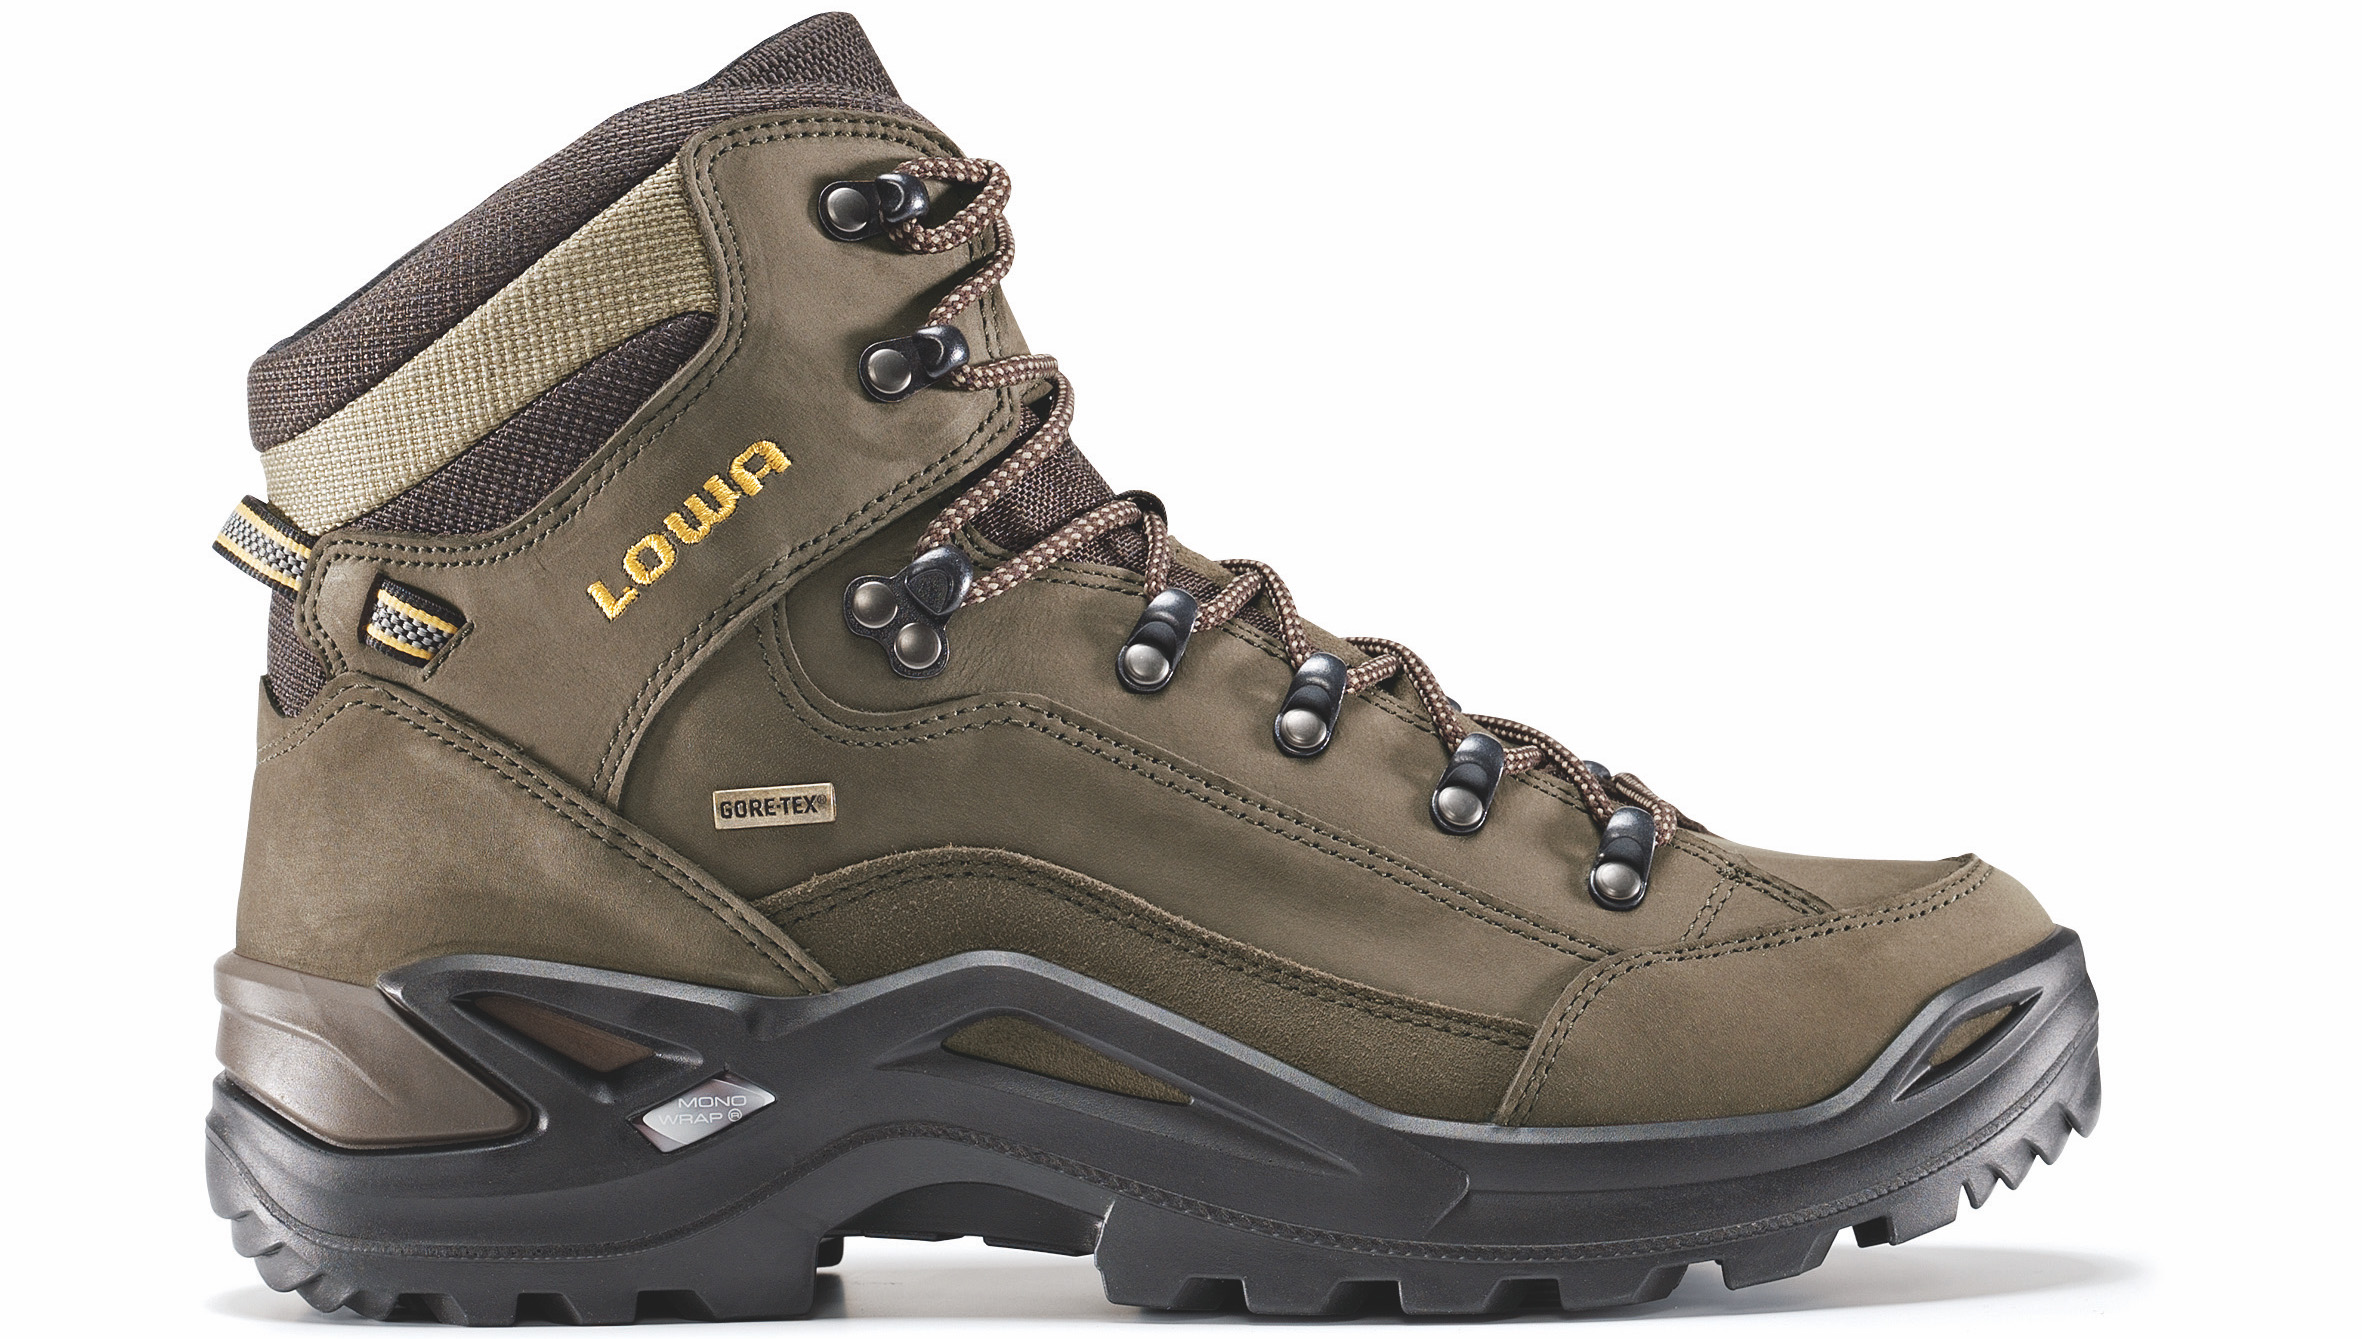 Boot Review: Lowa Ticams & Renegades | Sporting Classics Daily